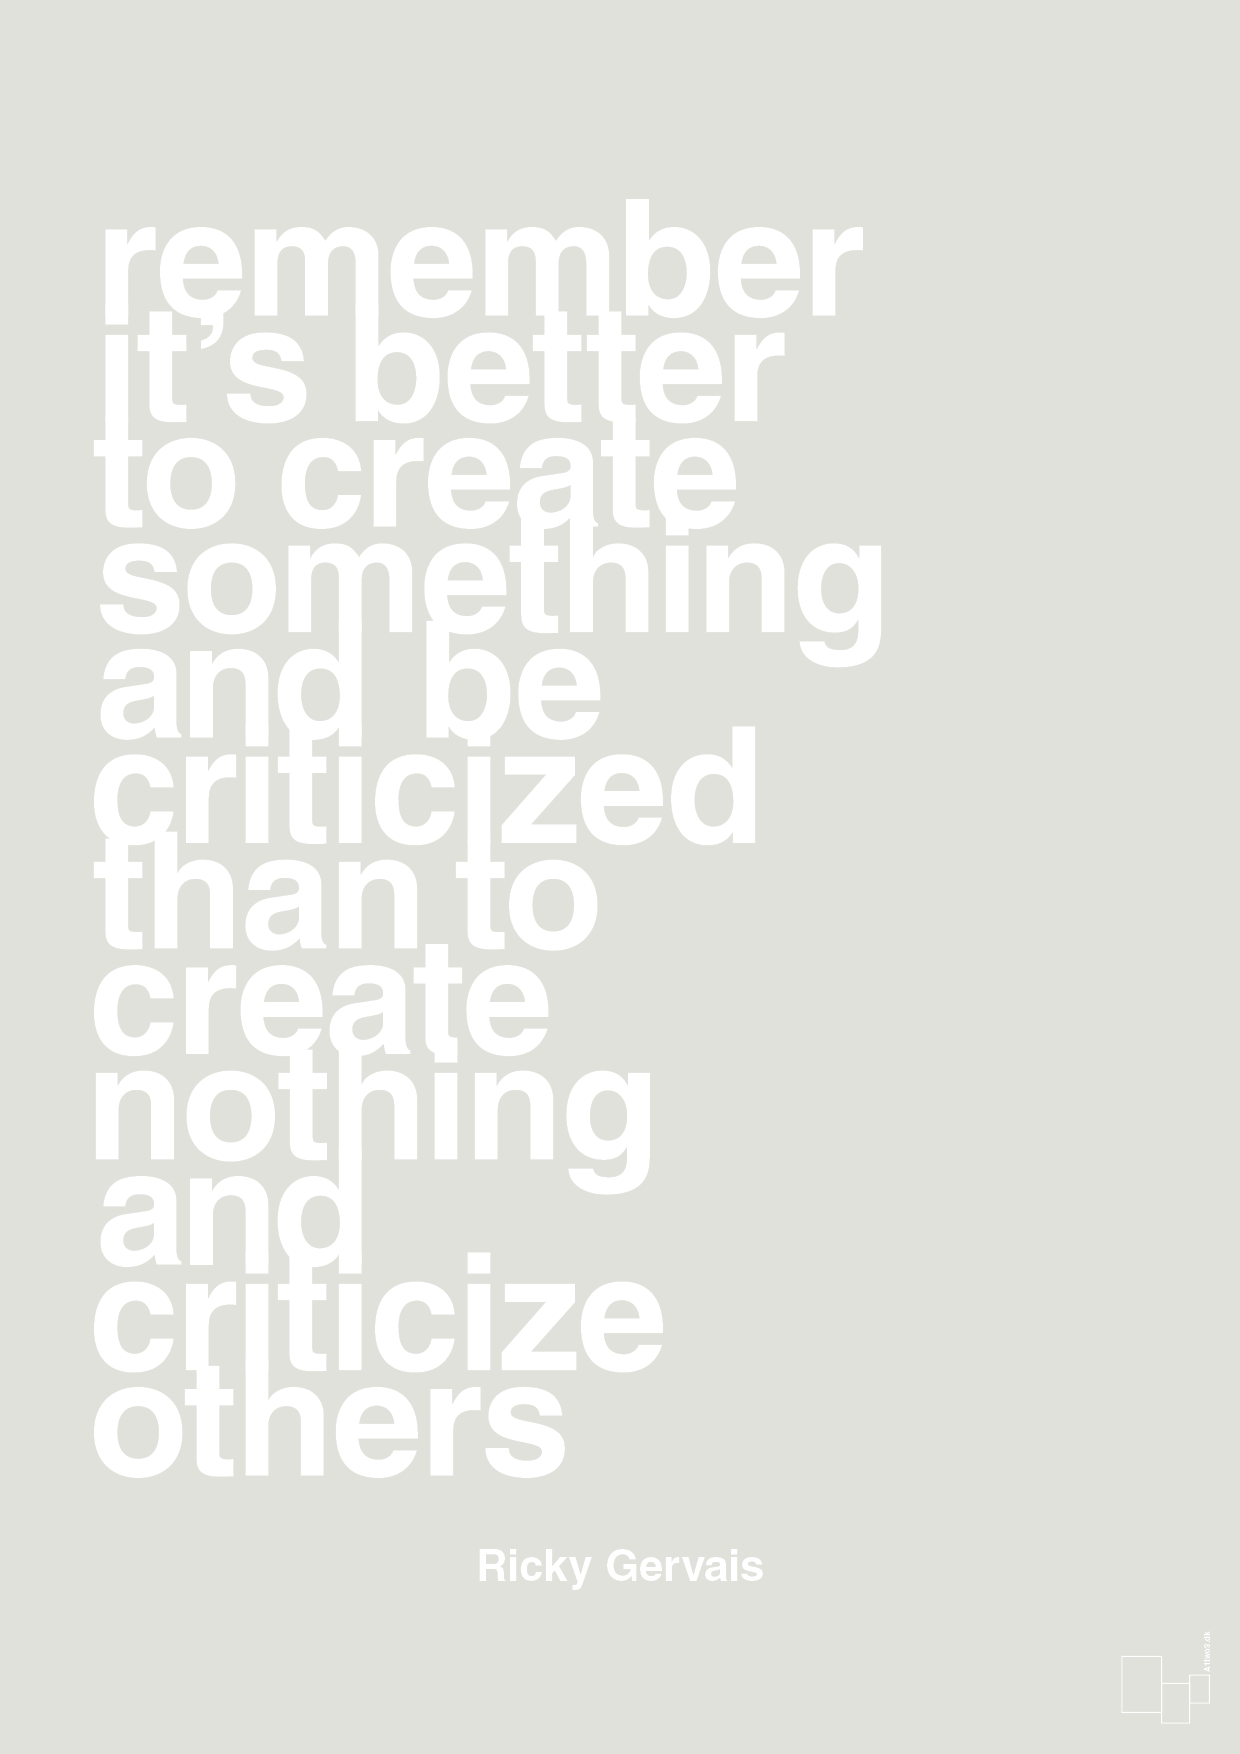 remember its better to create something and be criticized than create nothing and criticize others - Plakat med Citater i Painters White